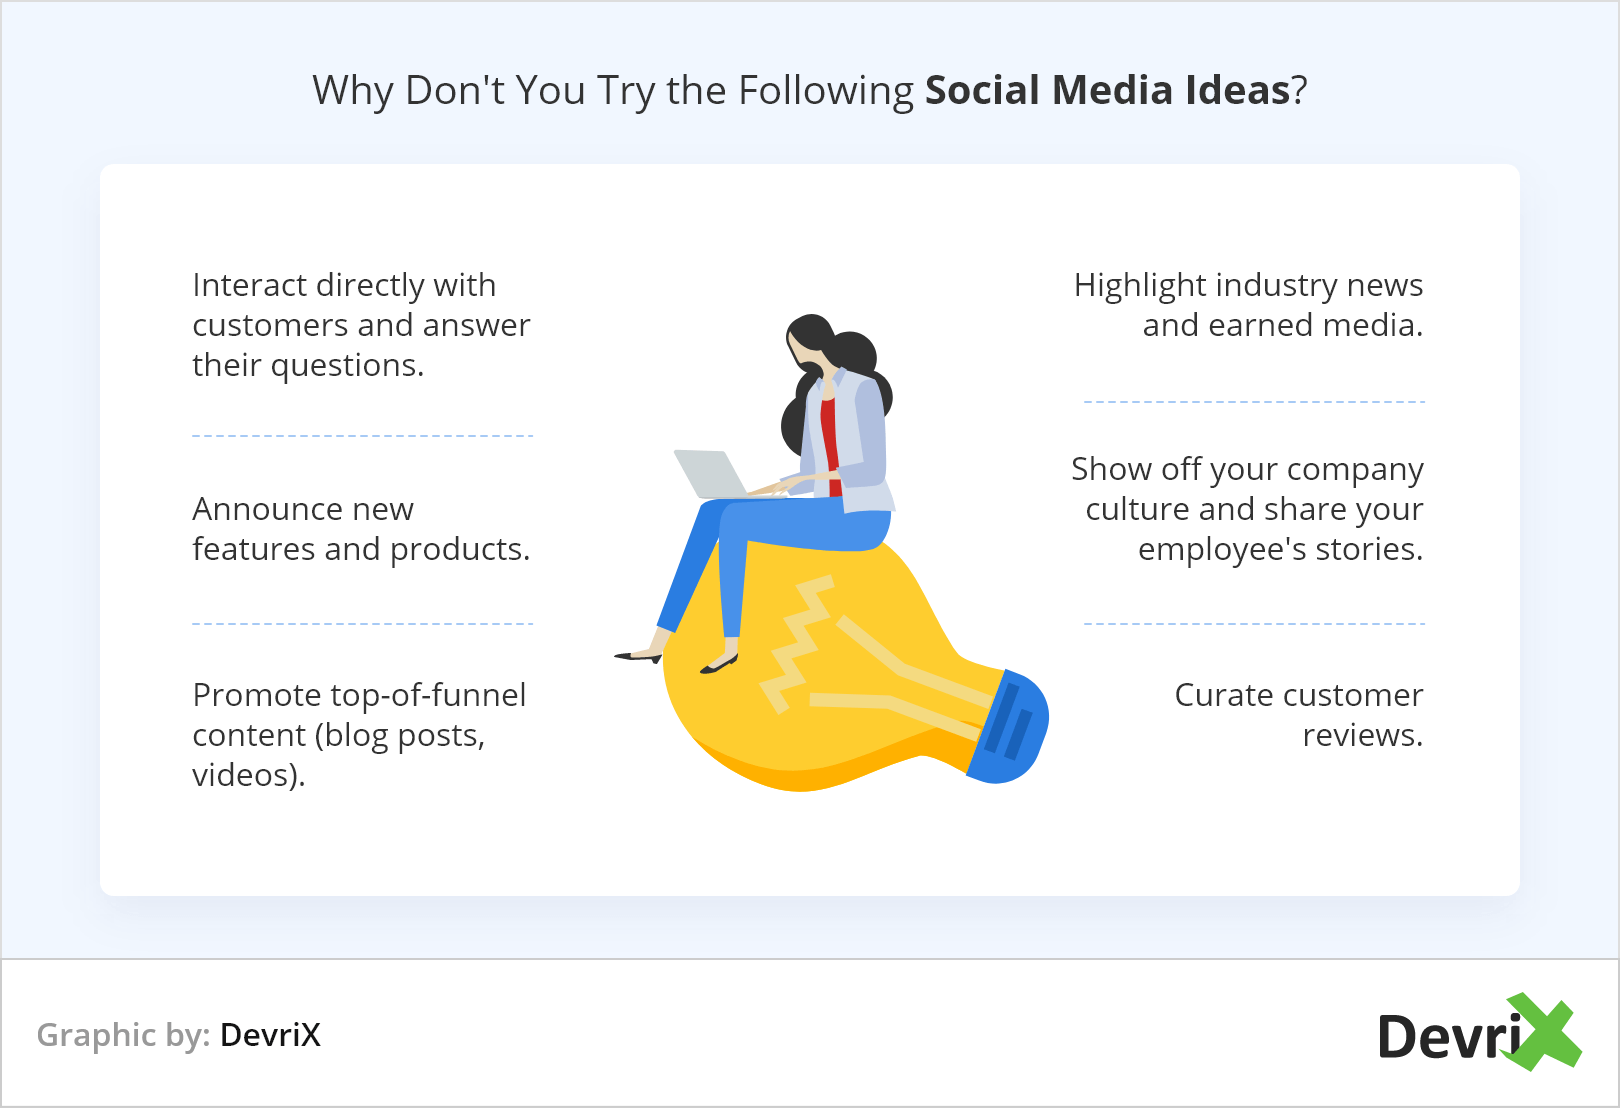 Why Don't You Try the Following Social Media Ideas